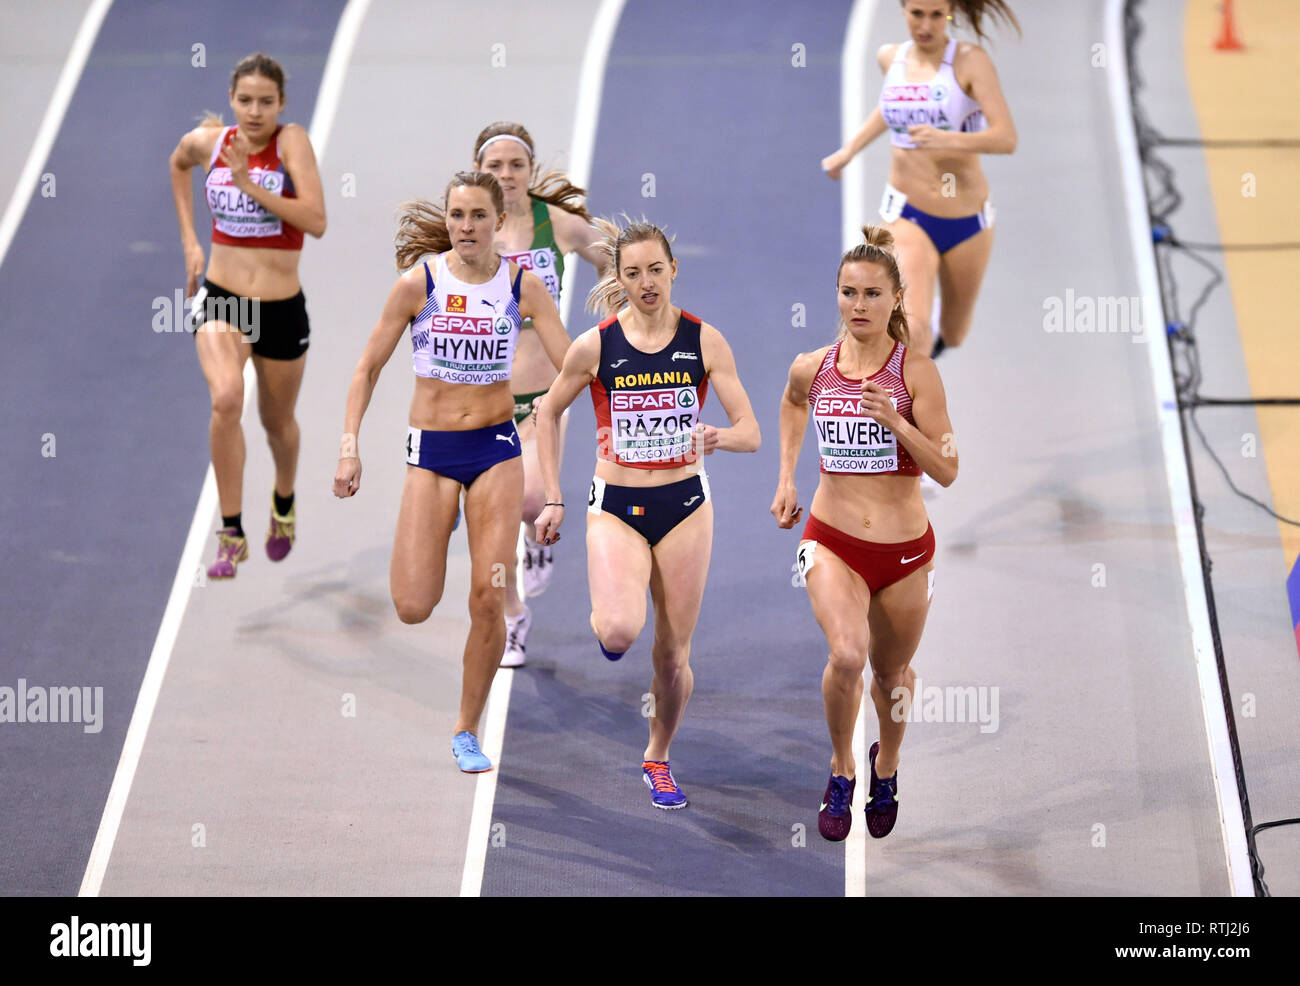 Latvia's Liga Velvere in front with Romania's Bianca Razor and Norway's Hedda Hynne behind competing in the Women's 800m heat 3 during day one of the European Indoor Athletics Championships at the Emirates Arena, Glasgow. Stock Photo